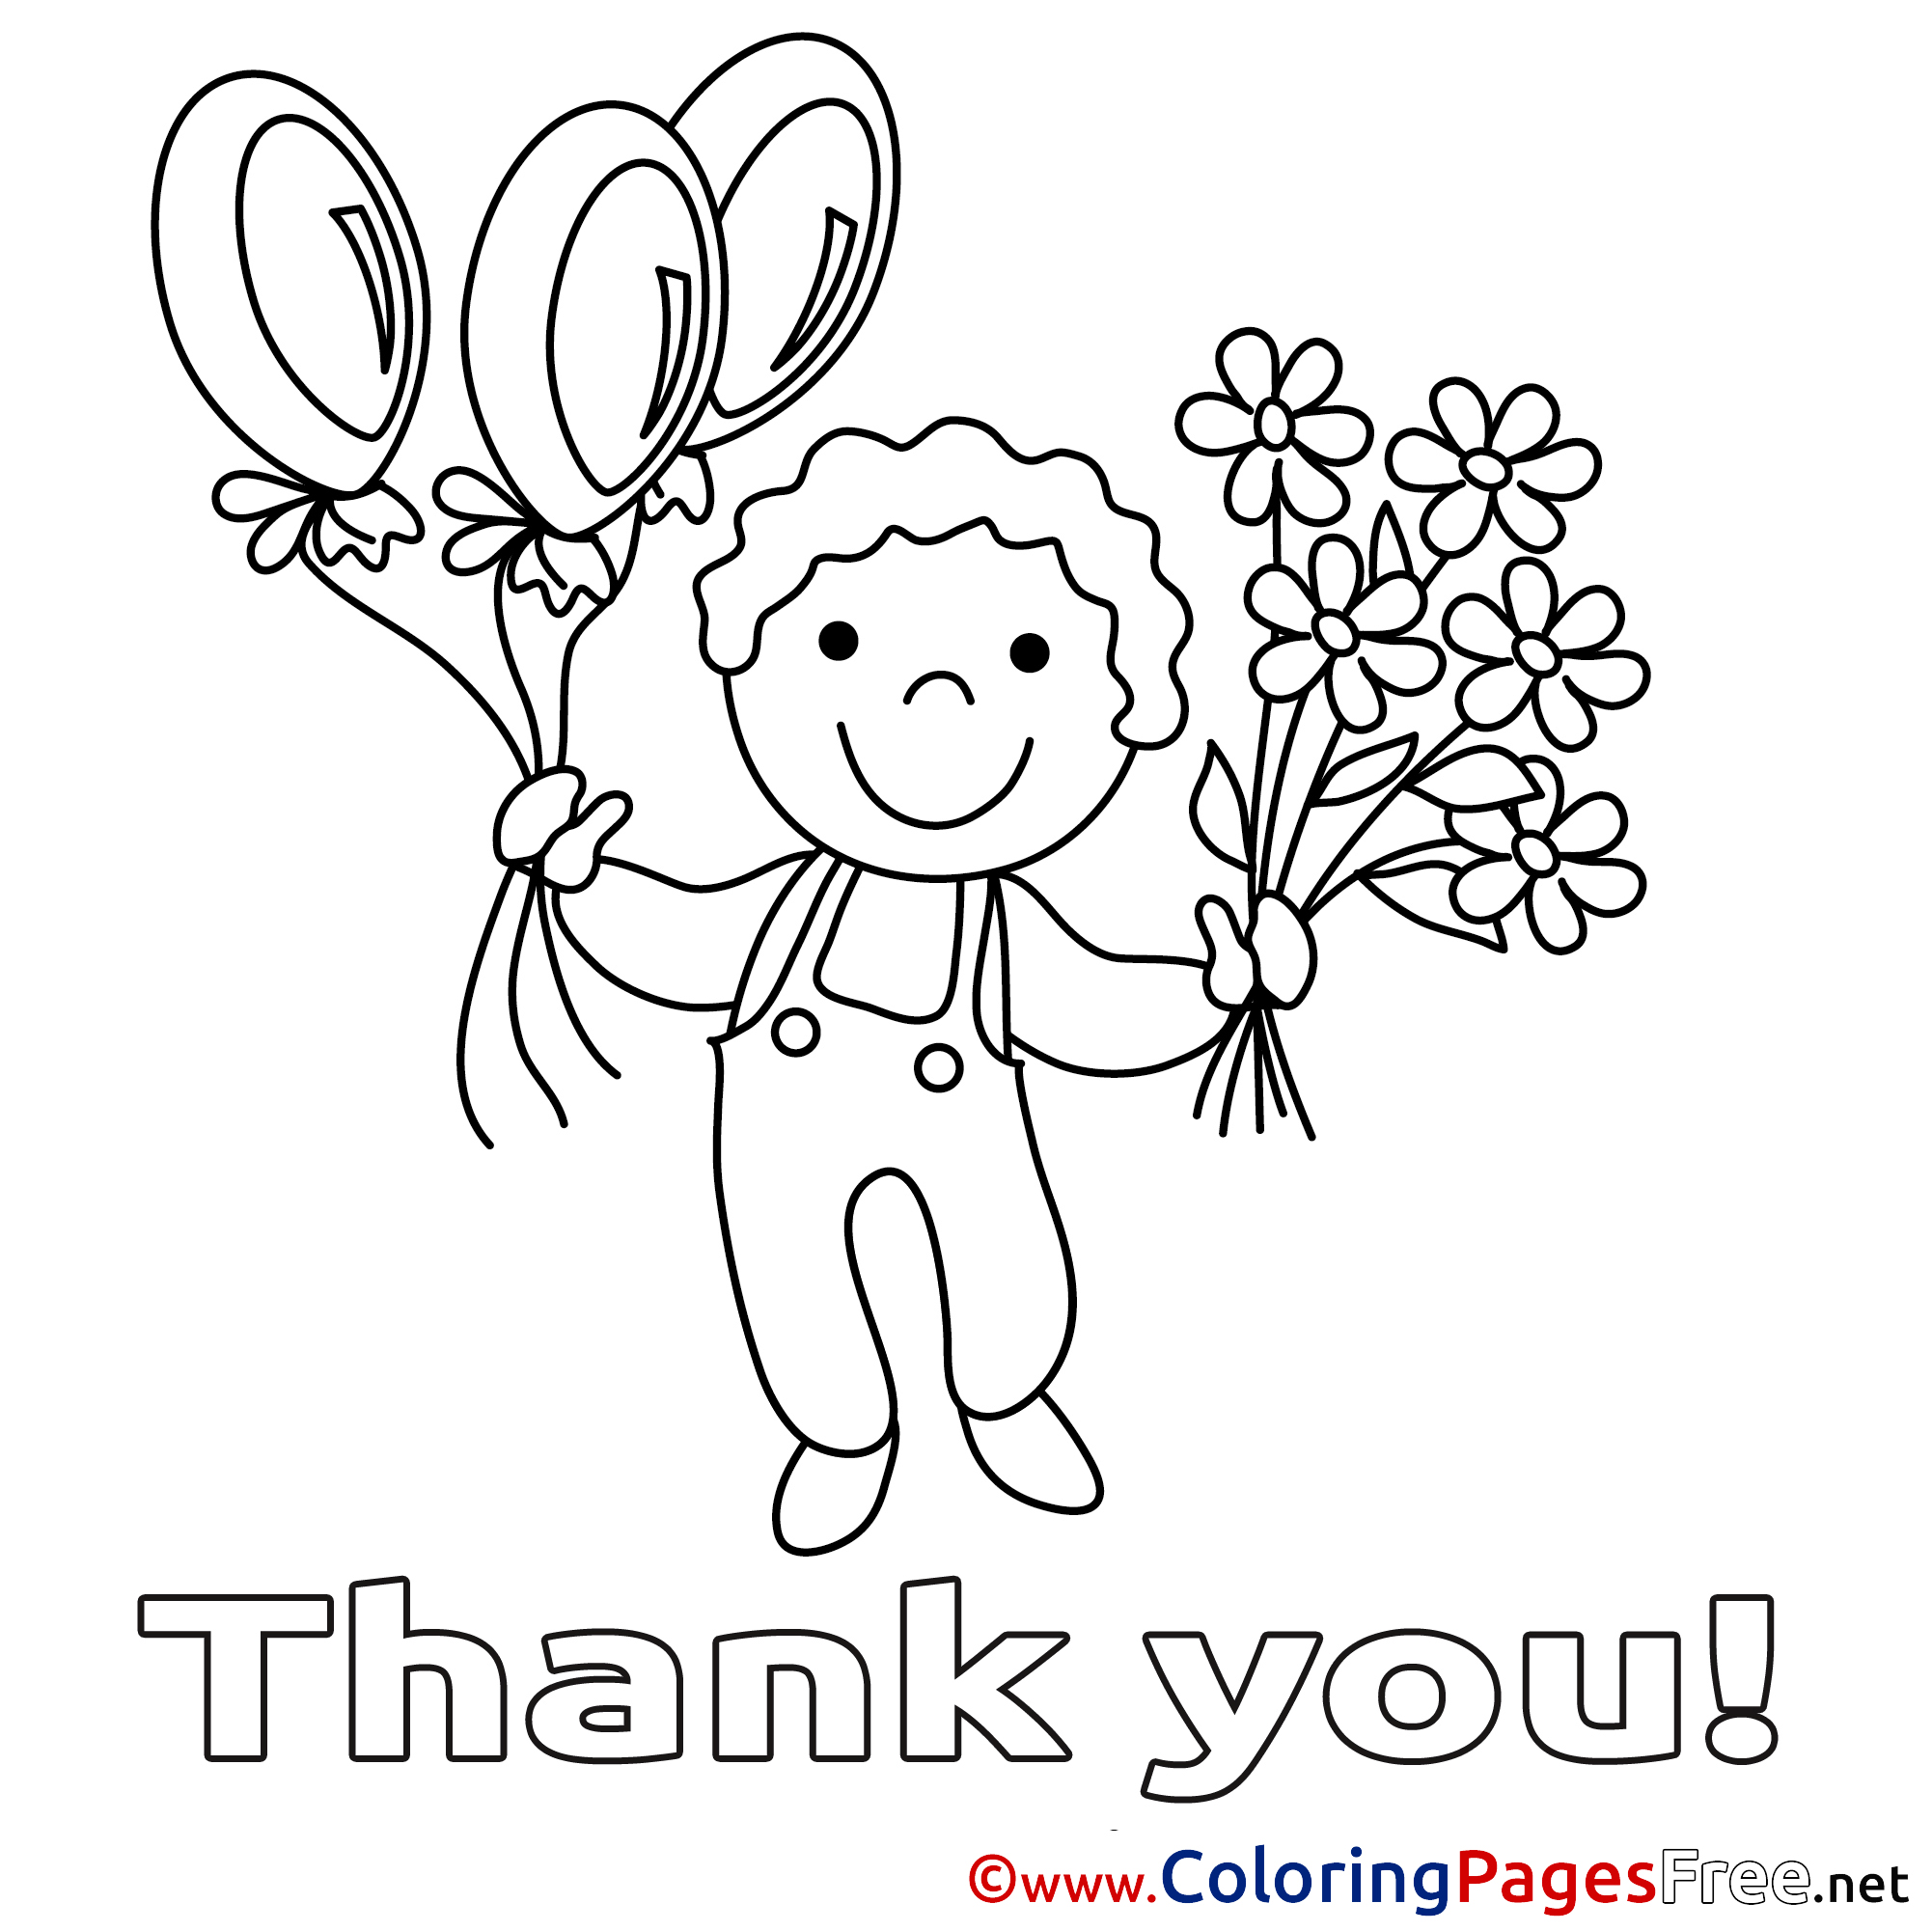 Free Printable Thank You Coloring Pages at GetColorings.com | Free